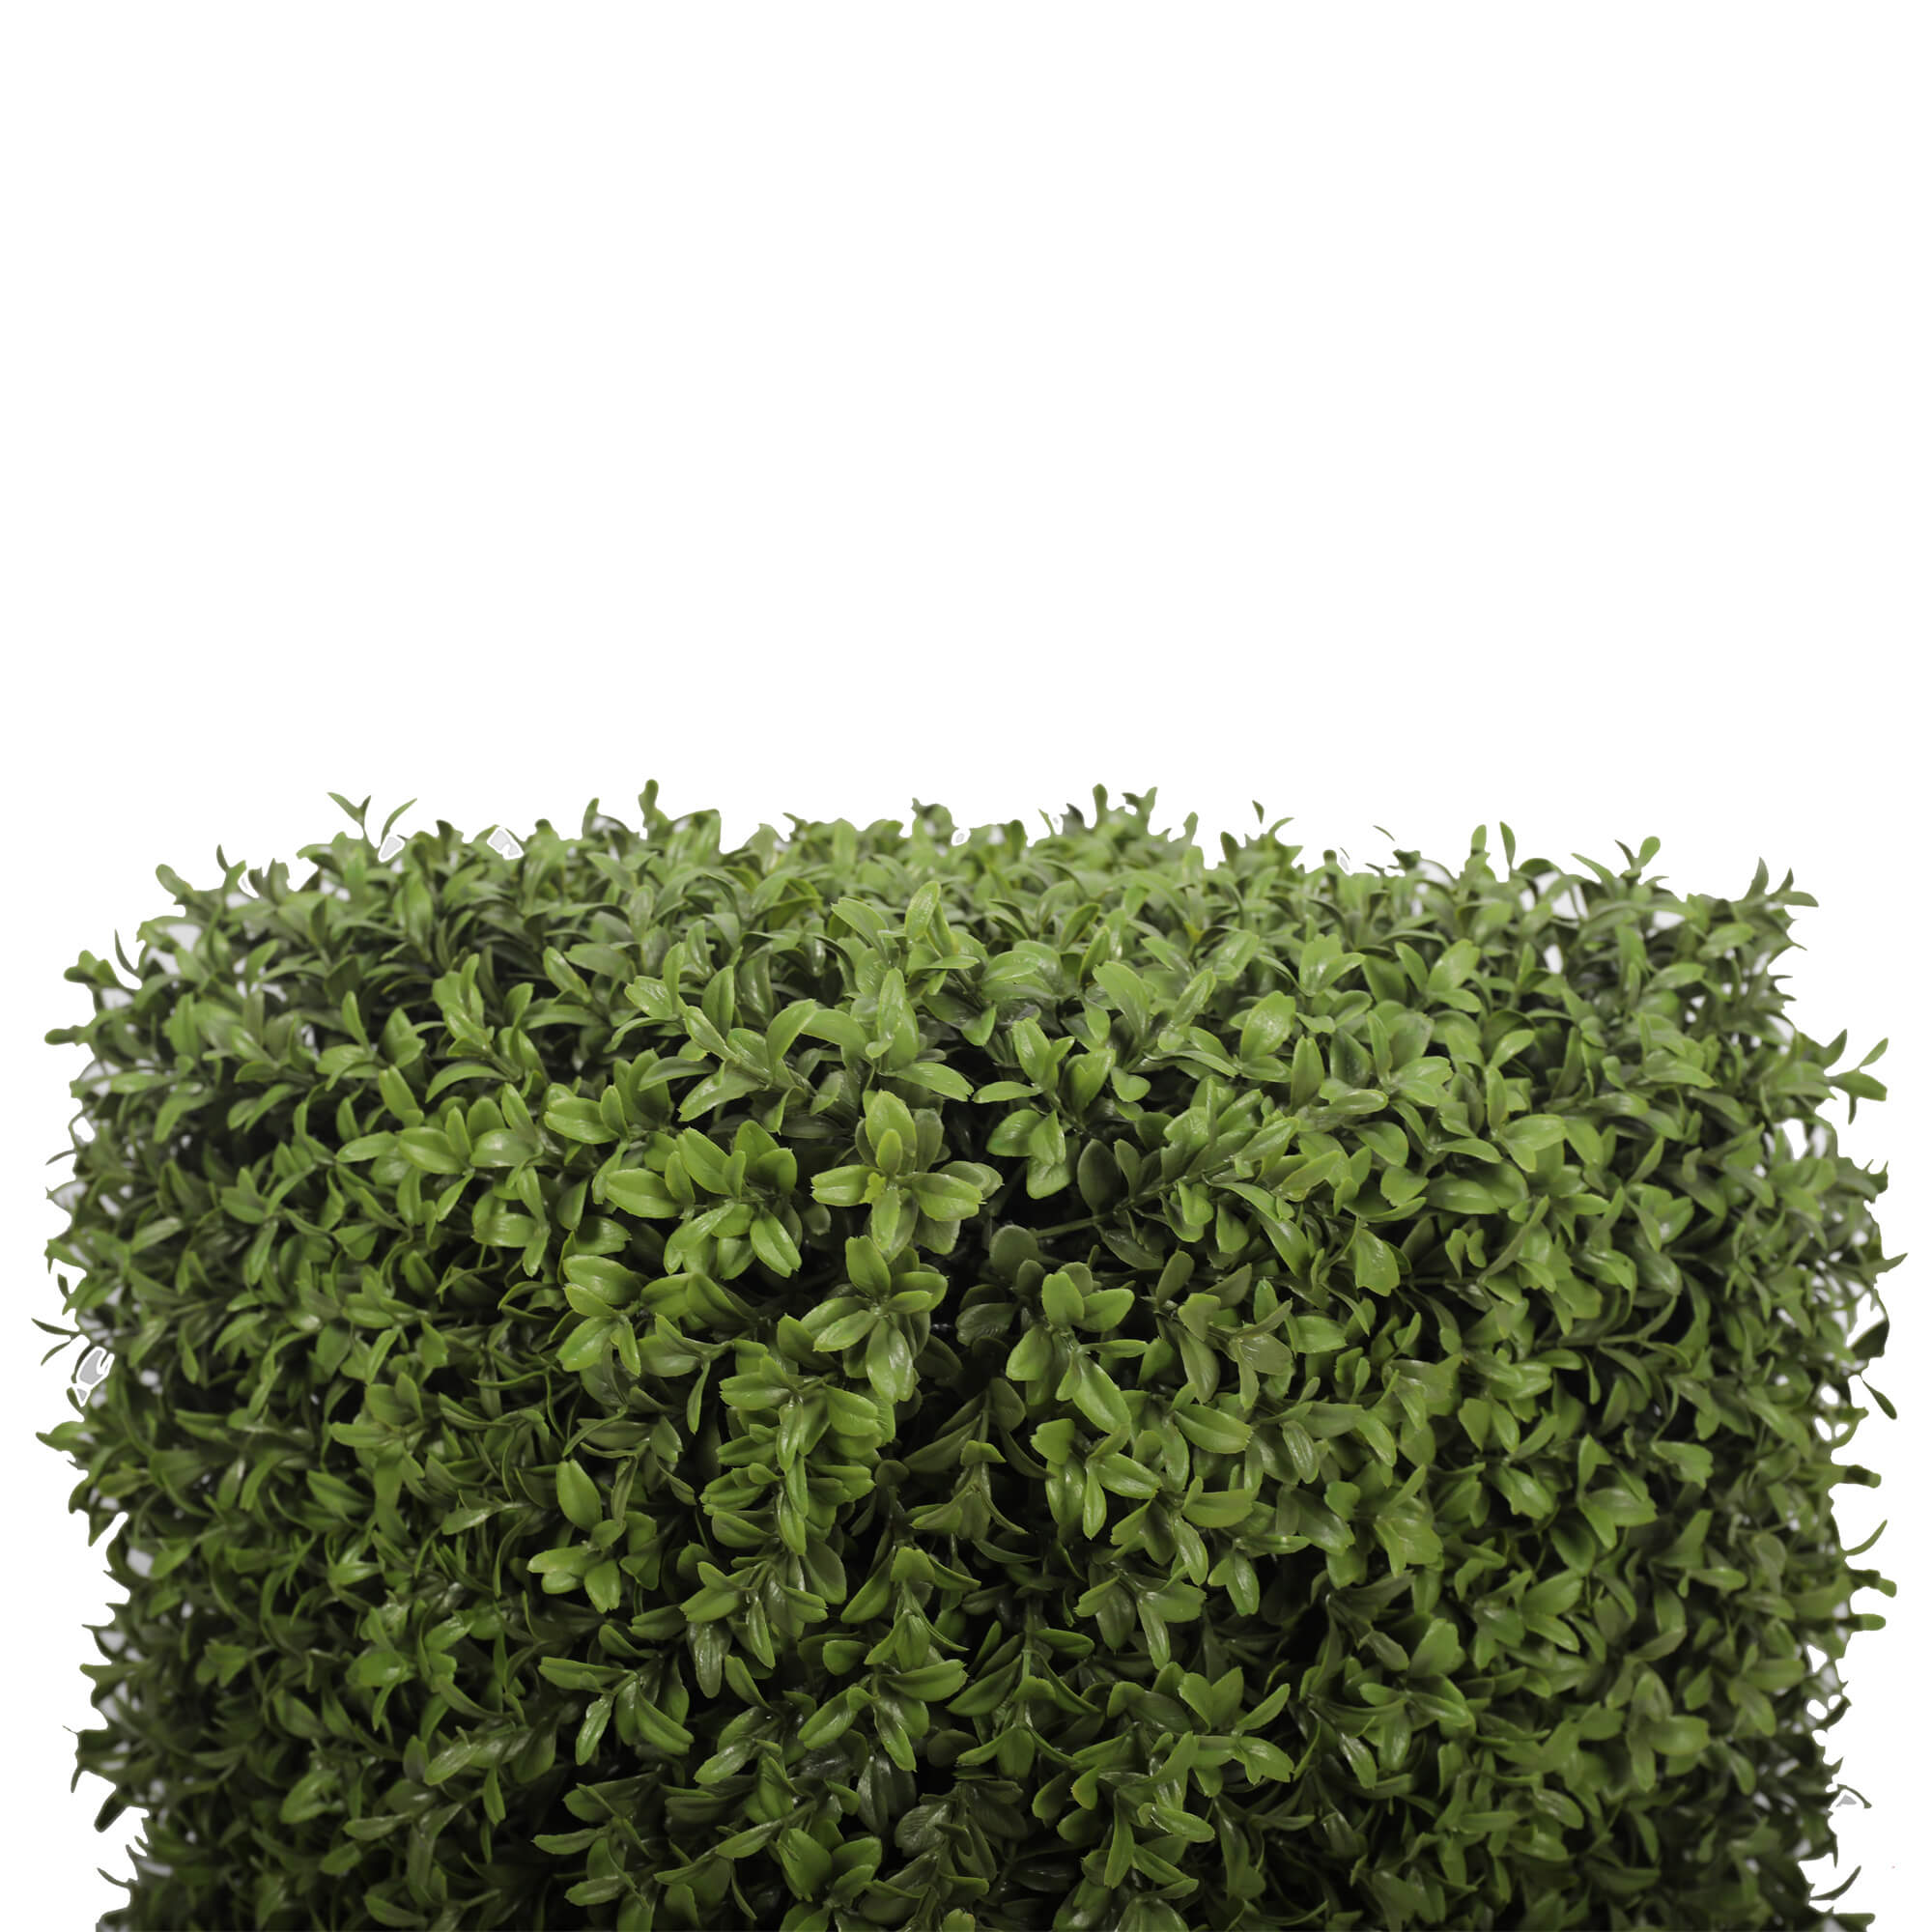 Premium Potted Artificial Square Topiary Plant 55cm - Designer Vertical Gardens Artificial Shrubs and Small plants Topiary Ball